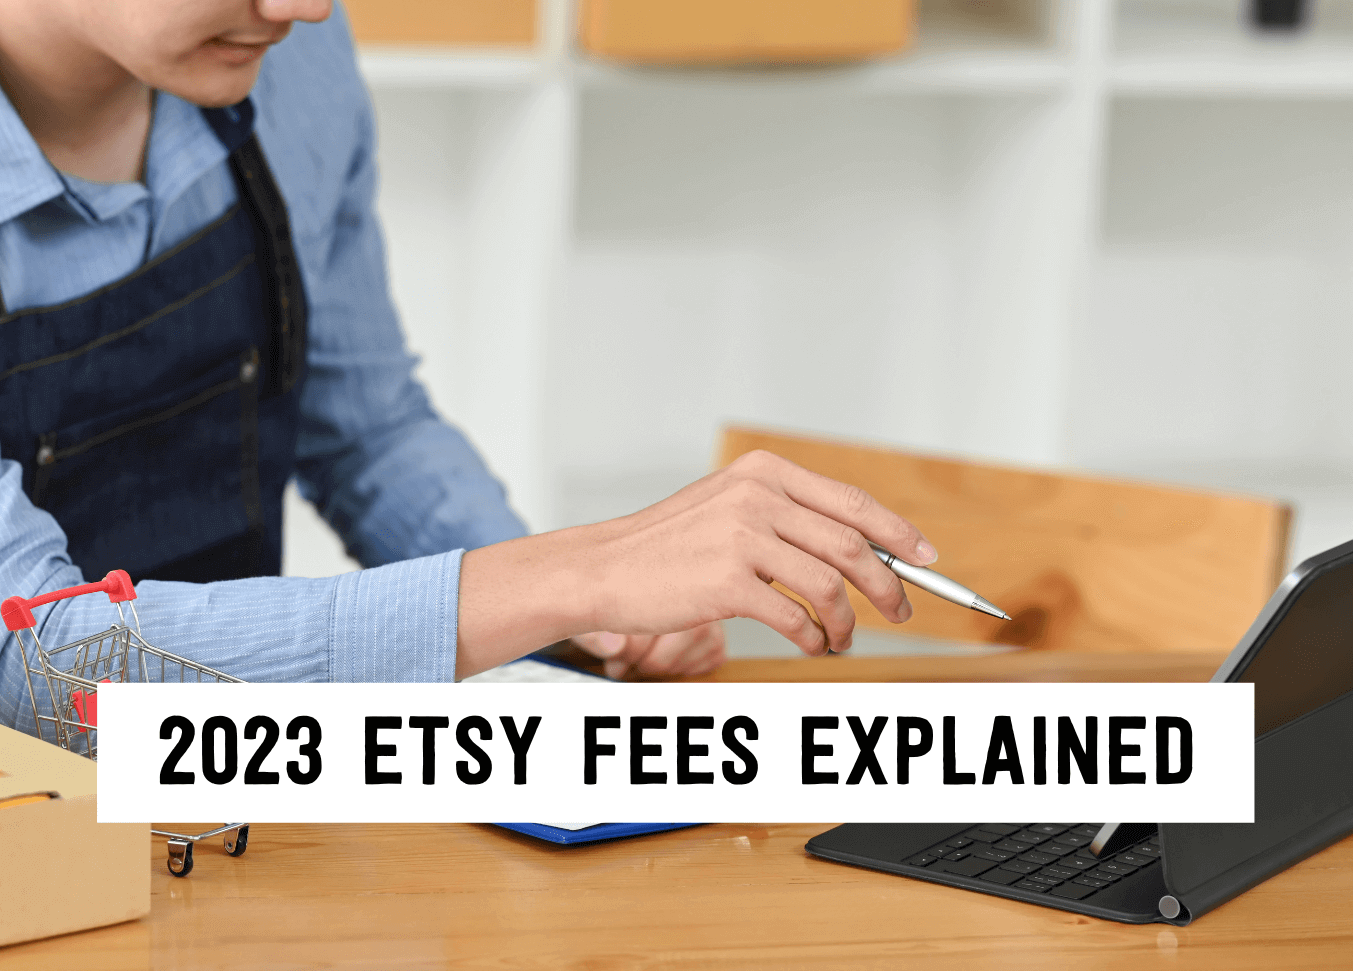 2023 Etsy fees explained | Tizzit.co - start and grow a successful handmade business